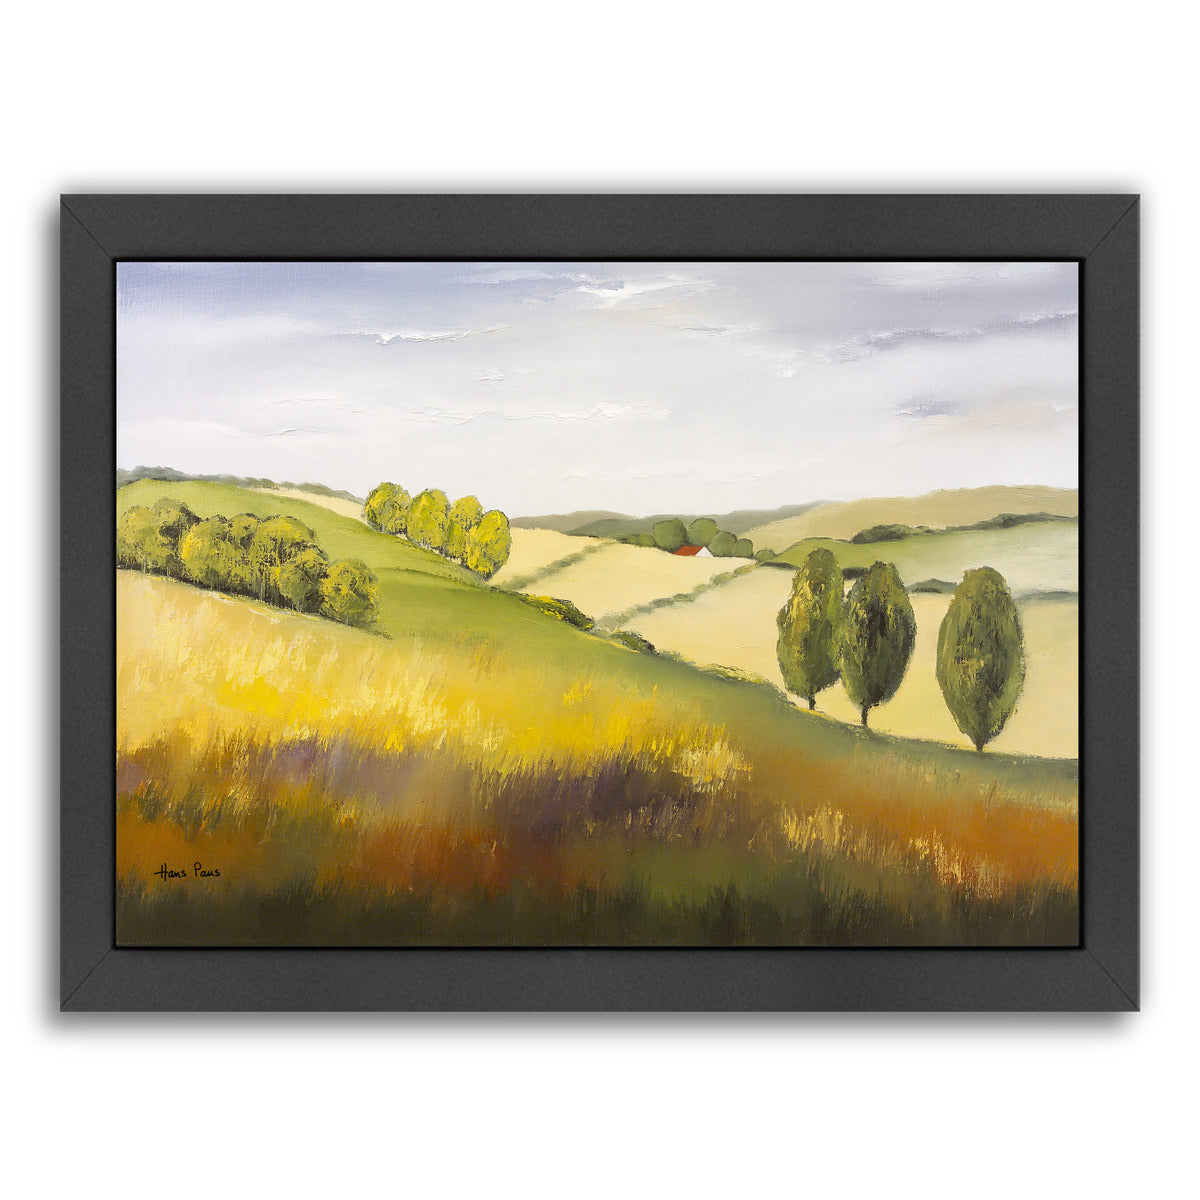 Cotswolds 1 By Hans Paus - Black Framed Print - Wall Art - Americanflat